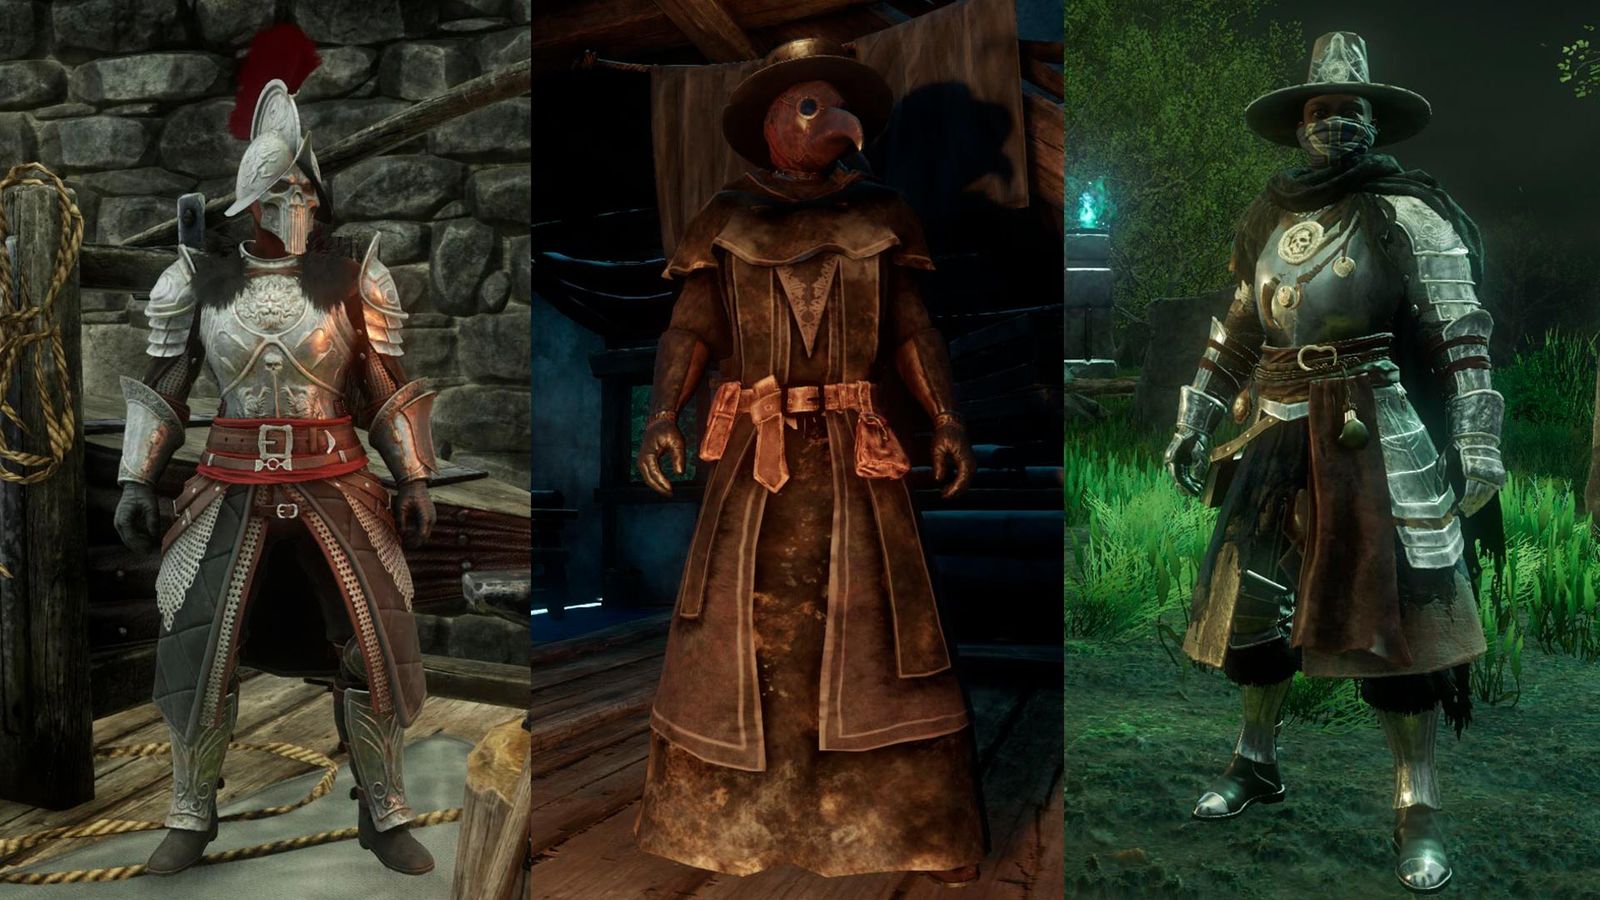 Three characters of different factions standing in seperate sections